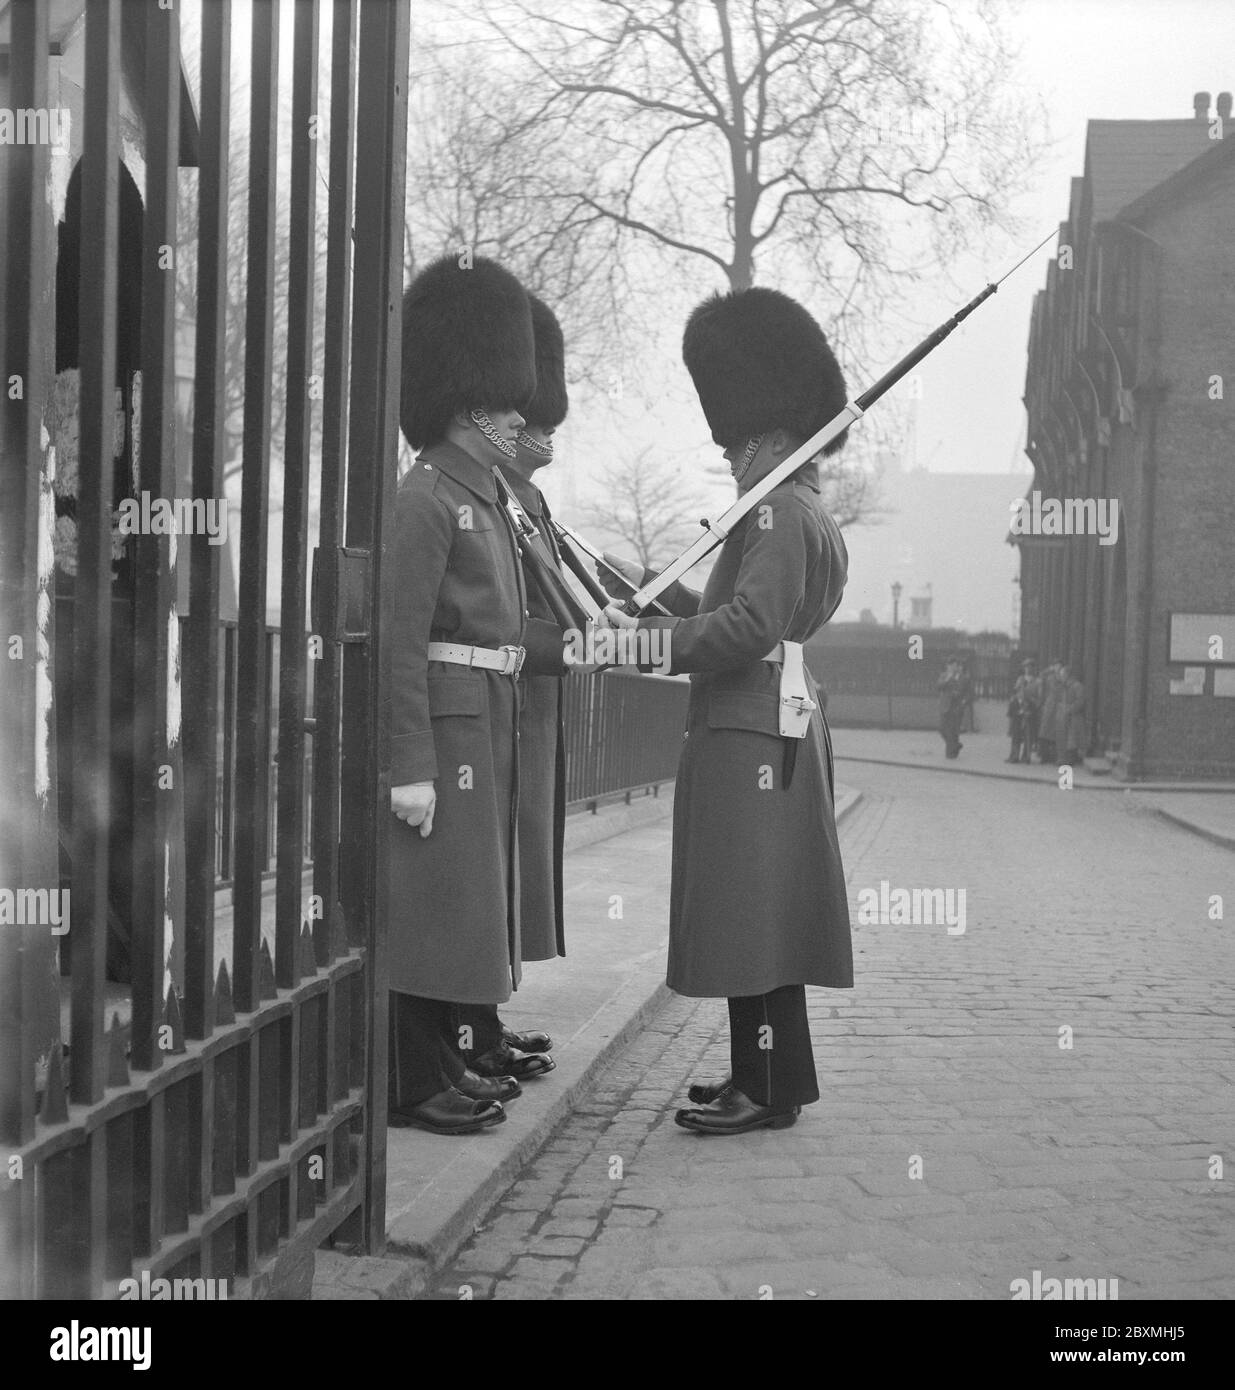 London in the 1950s. Changing of the guard London 1952 Stock Photo